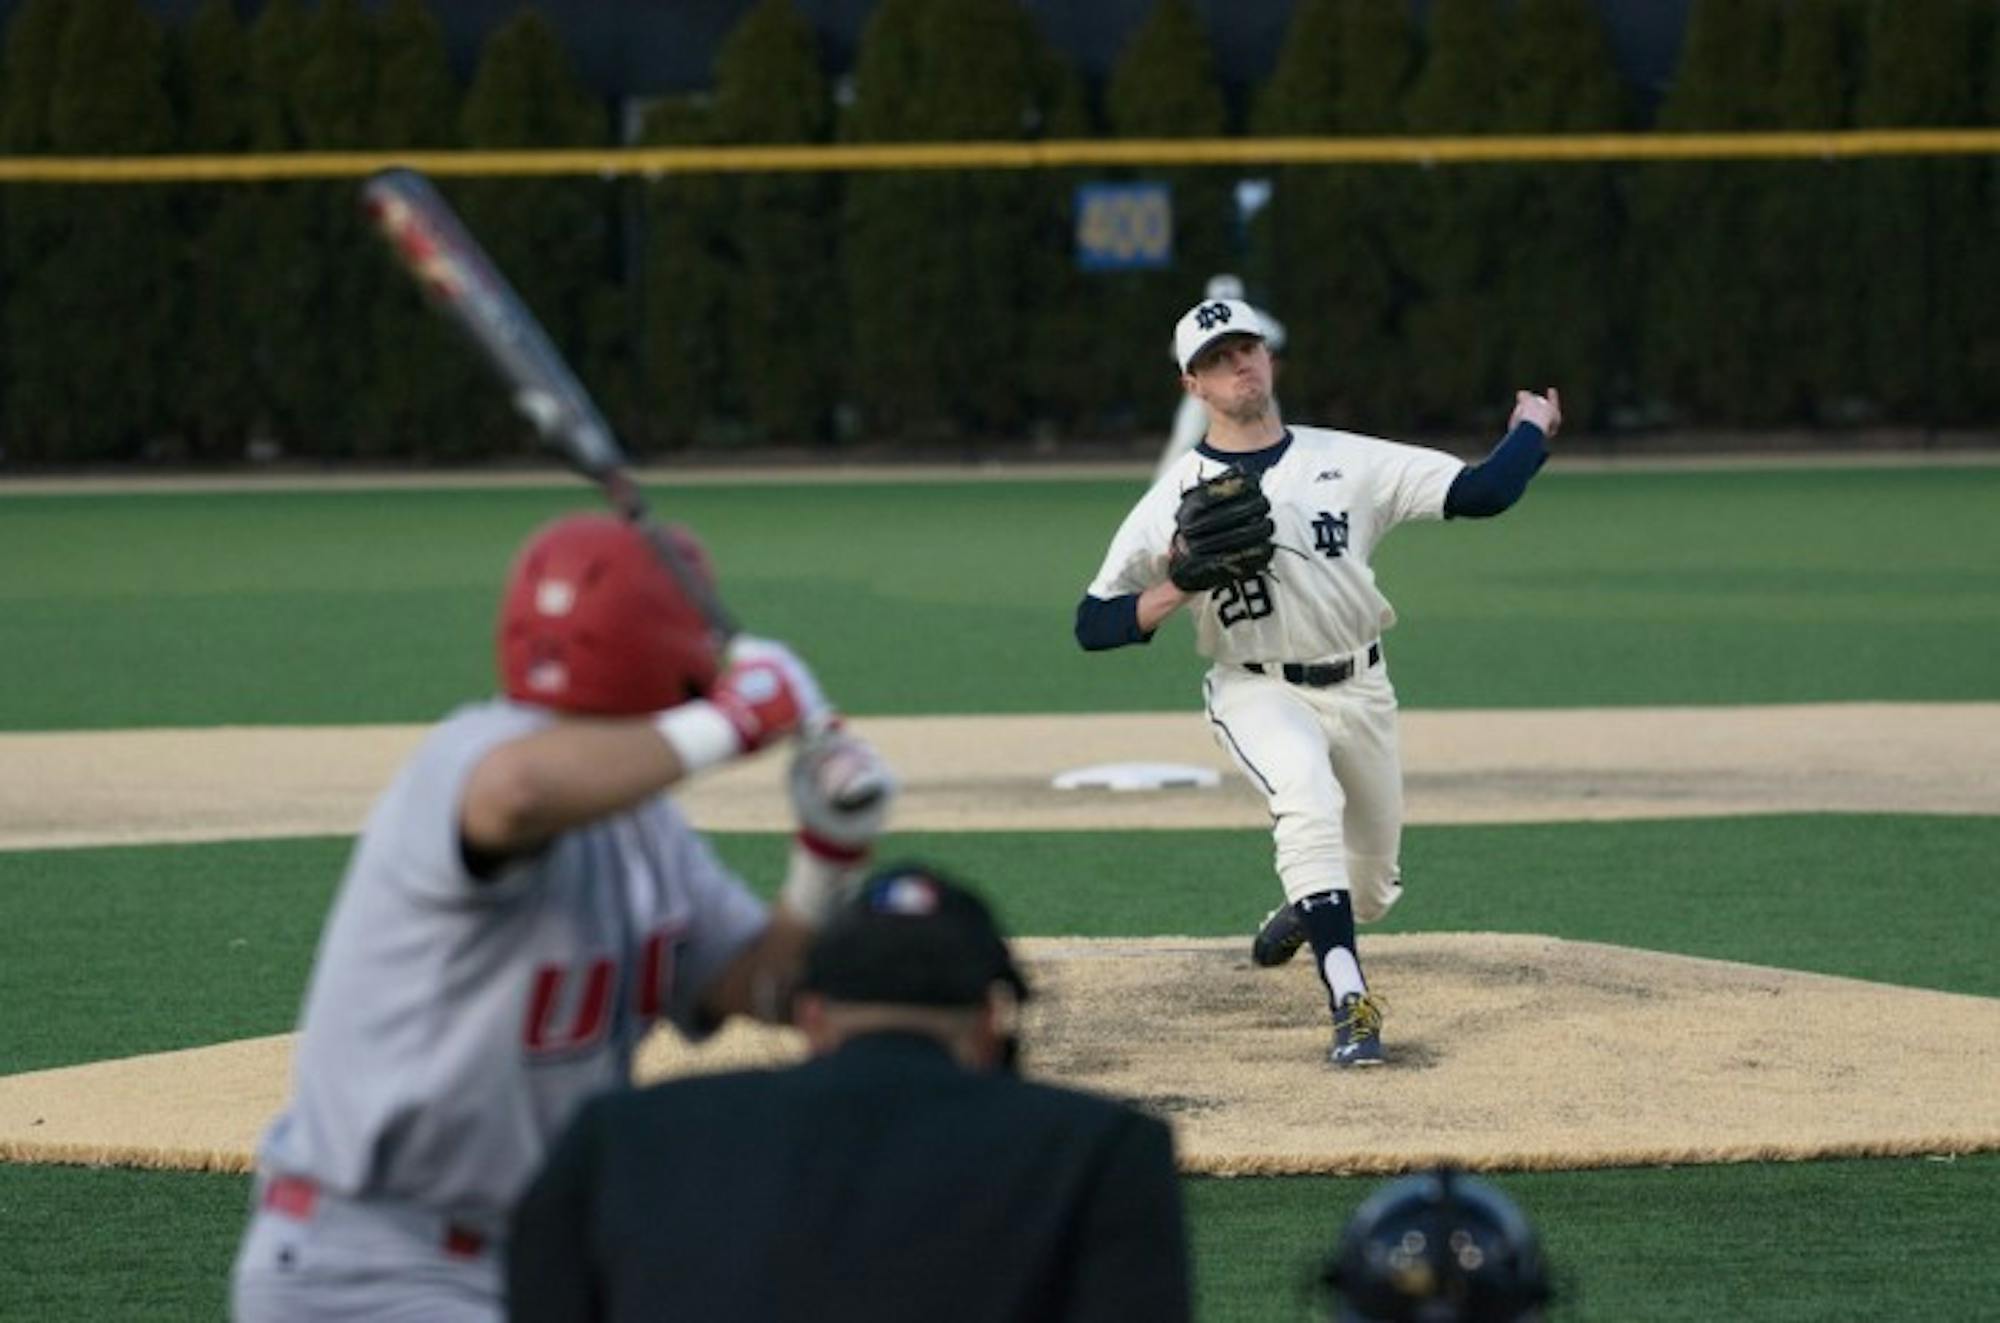 Irish senior left-hander Michael Hearne fires a pitch during Notre Dame's 9-5 win over UIC on March 22 at Frank Eck Stadium. Notre Dame has won every game Hearne has started this season.